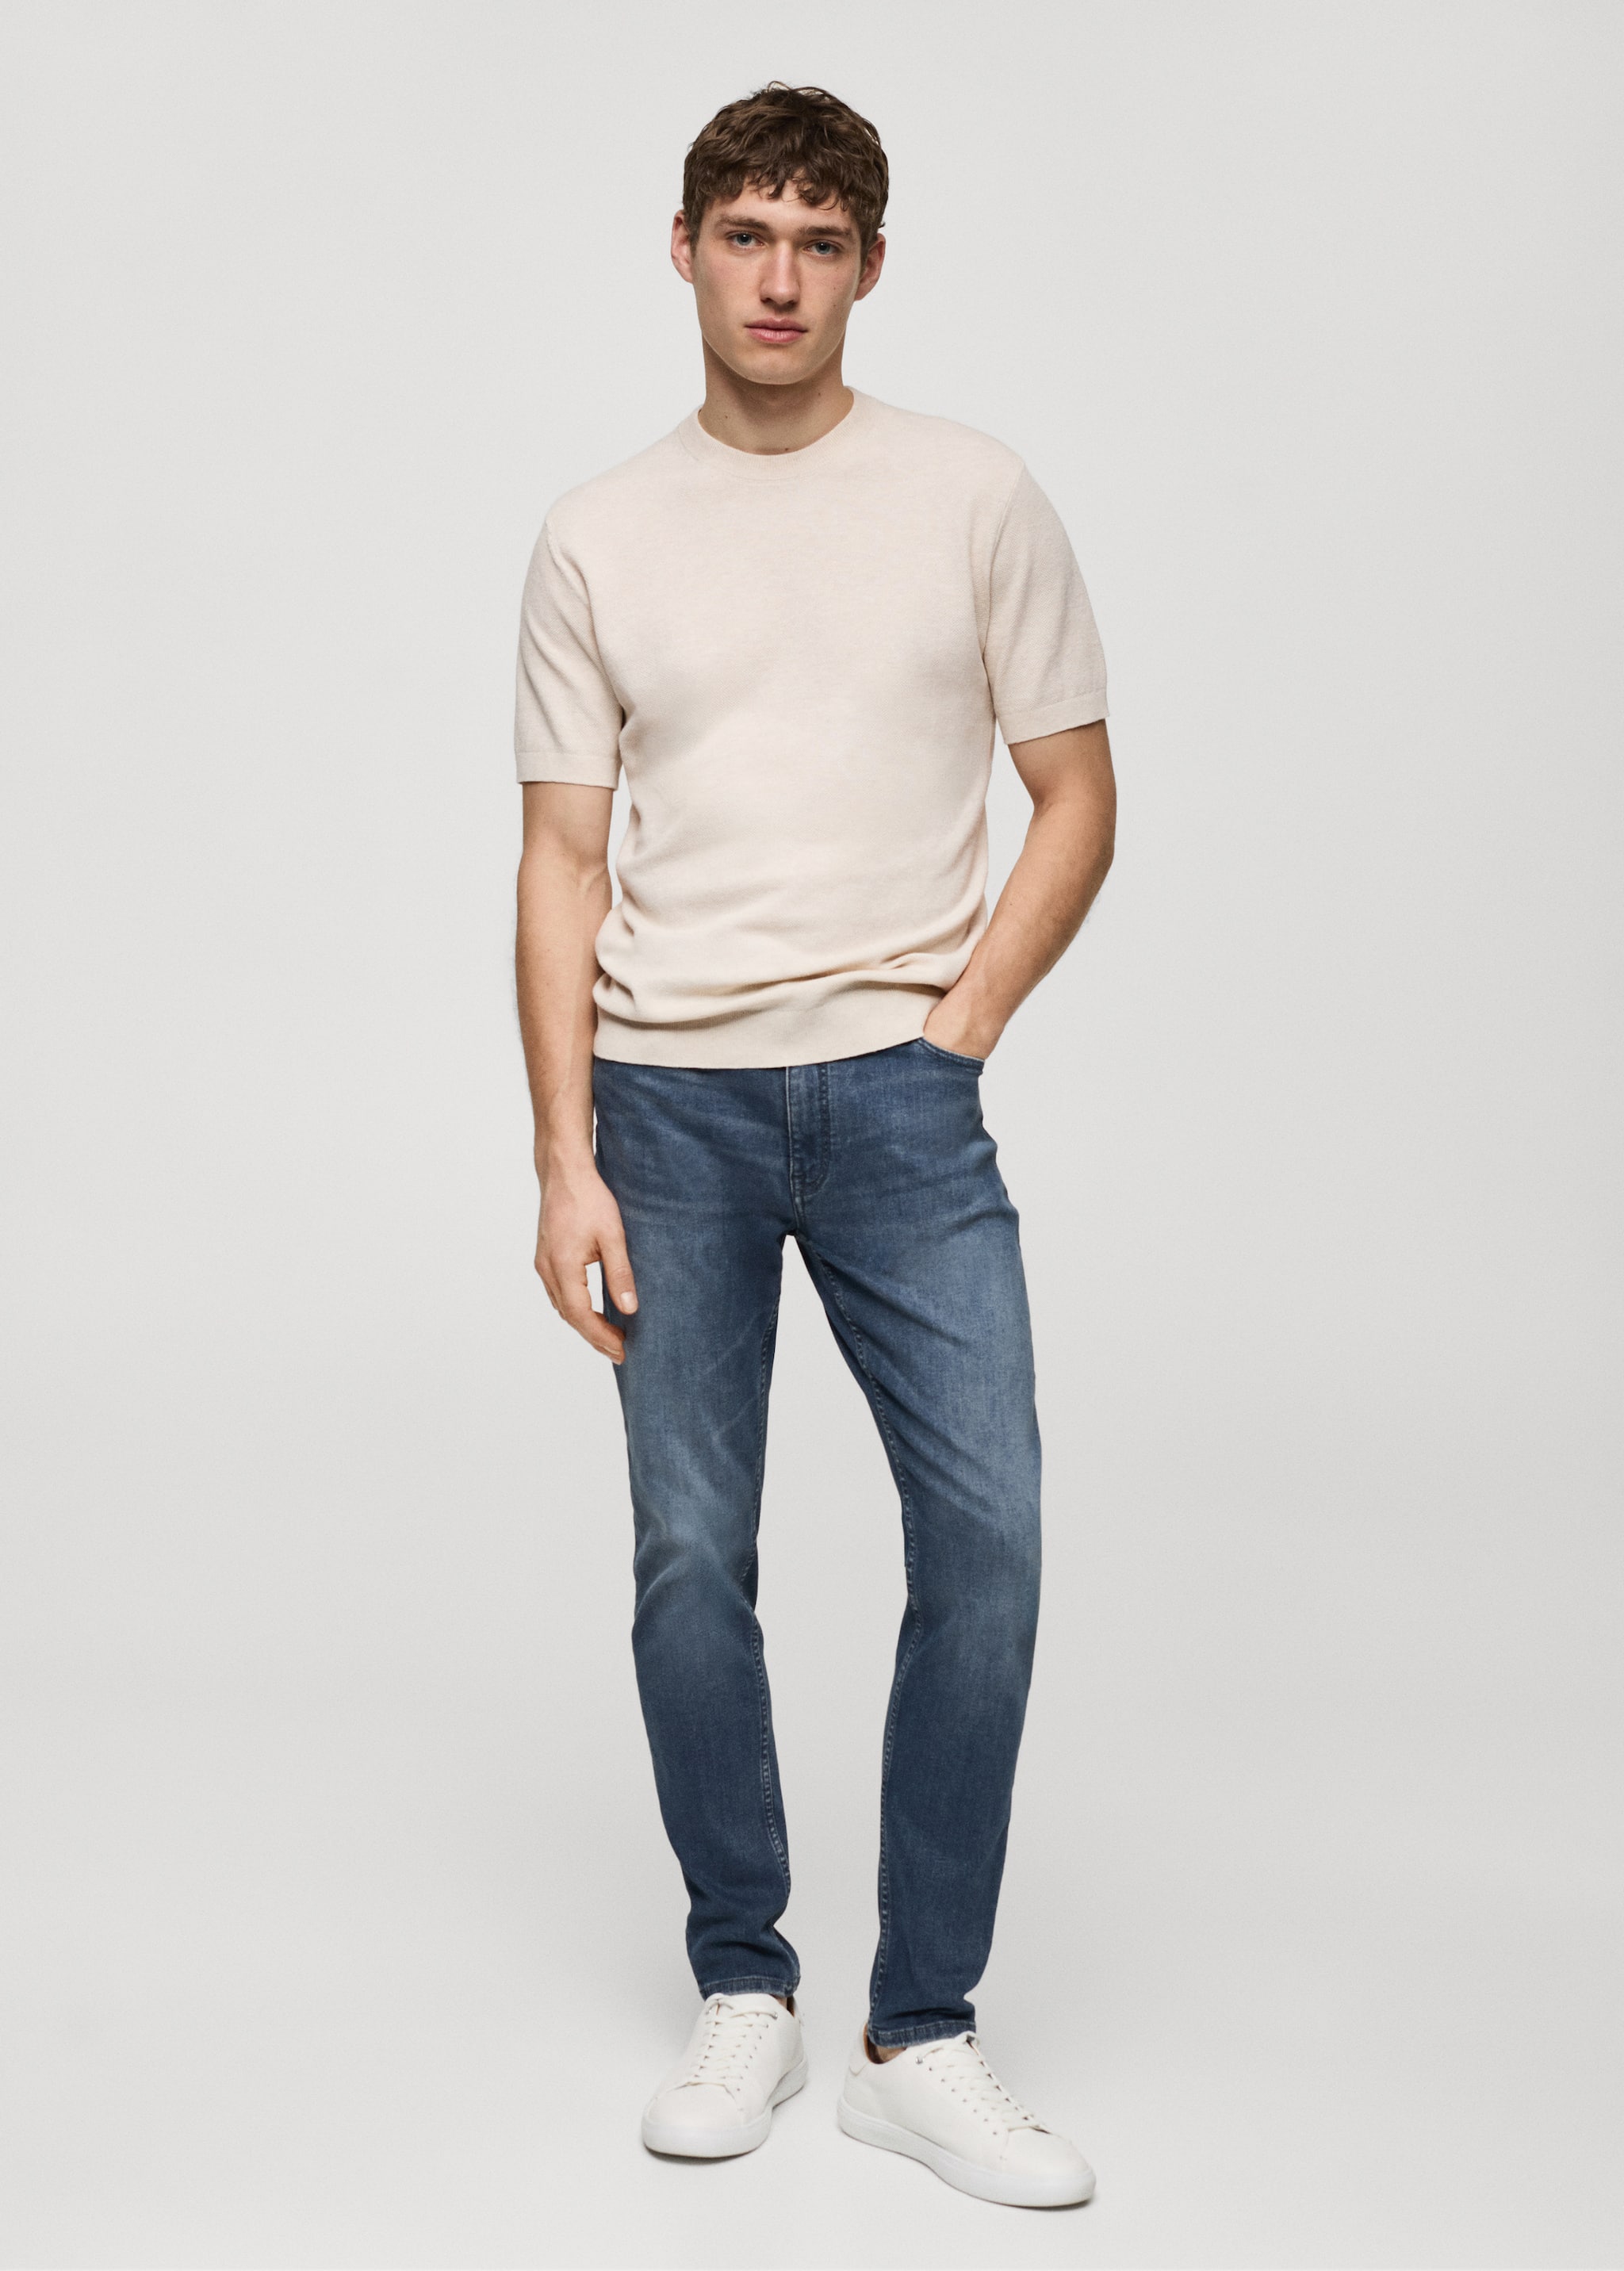 Jeans Jude skinny fit - Plano general